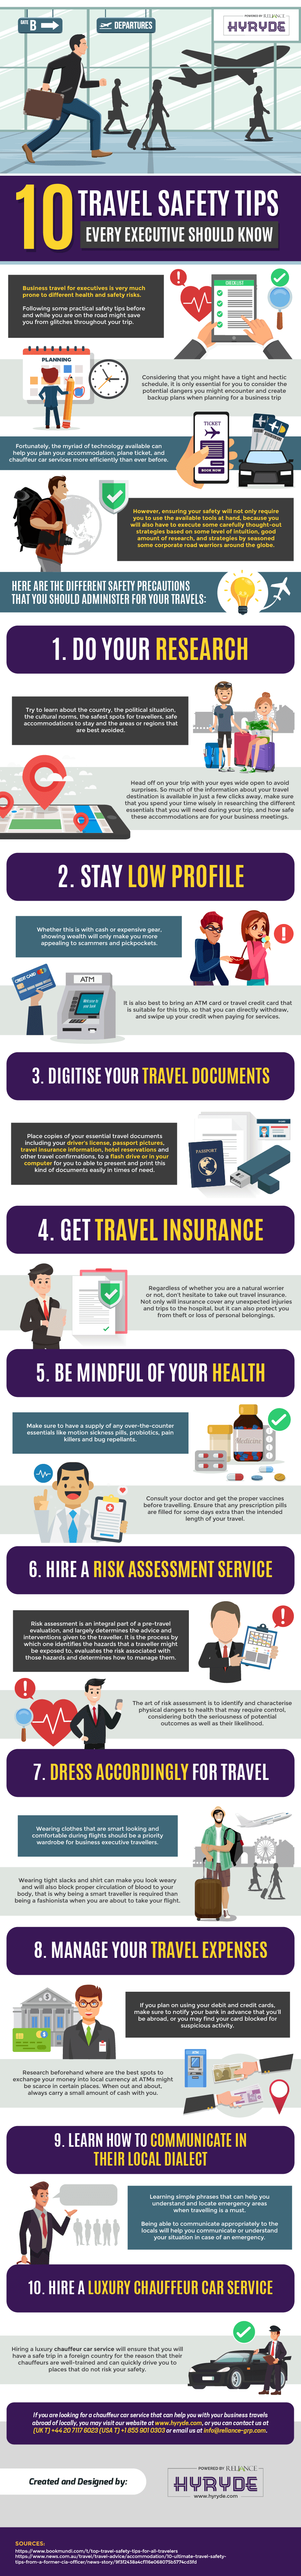 10-Travel-Safety-Tips-Every-Executive-Should-Know